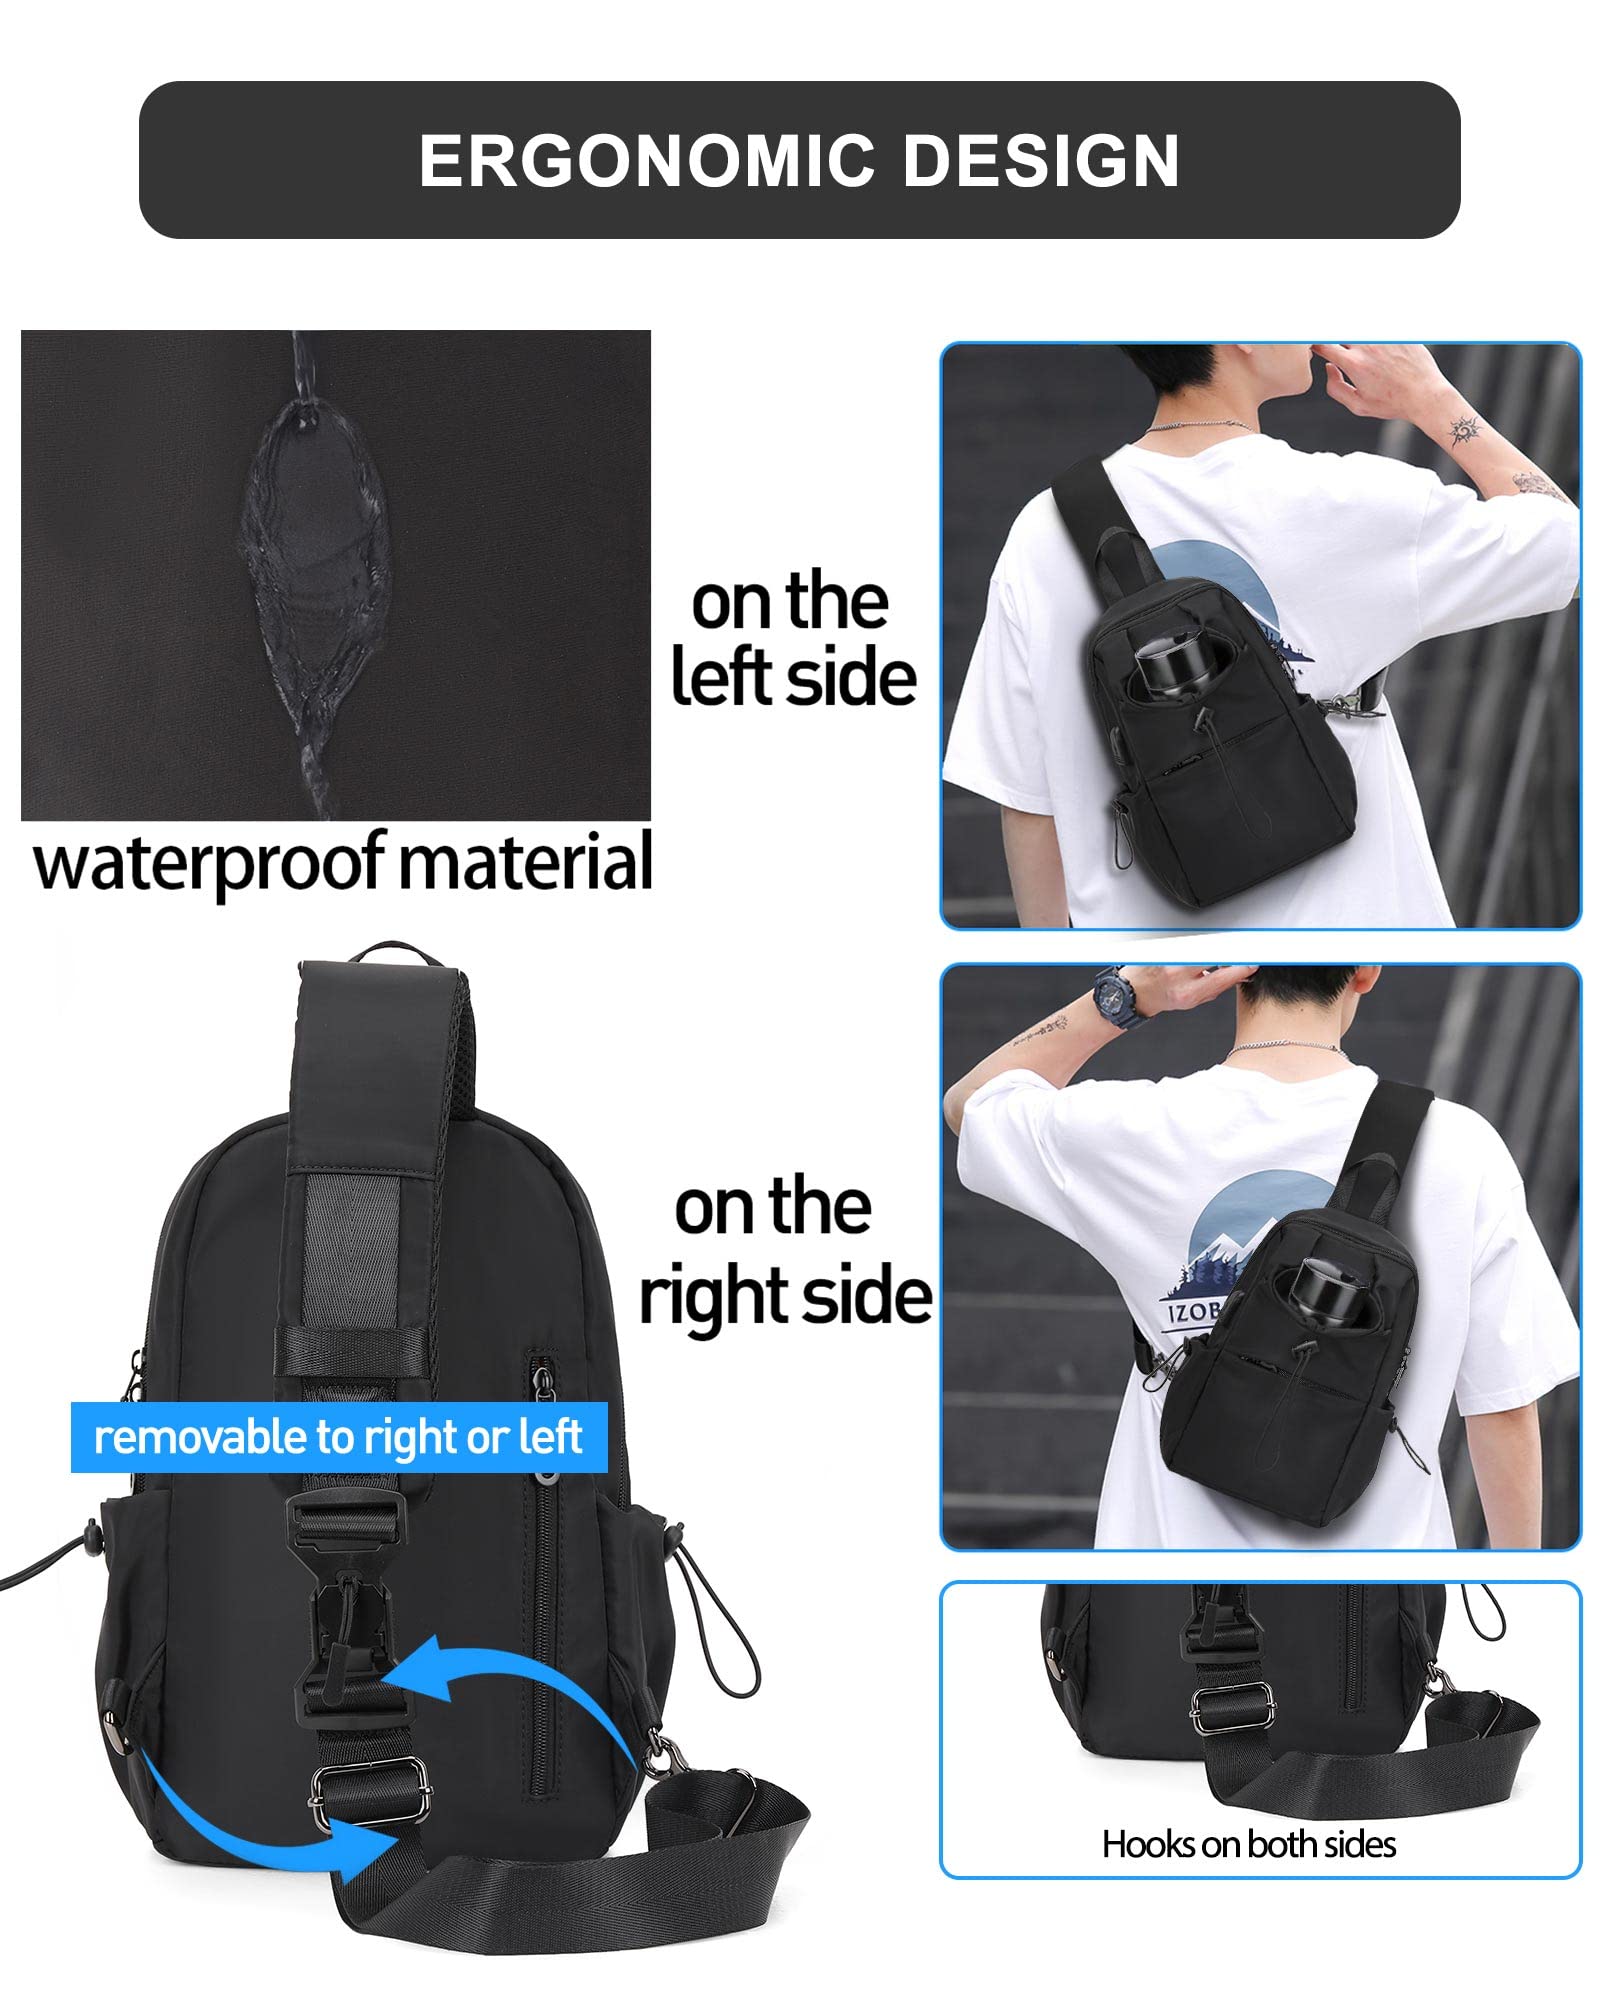 Black Sling Crossbody Bag for Men Women, Tactical Backpack Shoulder Daypack Mini Anti-Theft Cross Body Motorcycle Chest Bags, Small One Strap Backpack for Casual Travel Hiking Outdoor Sports